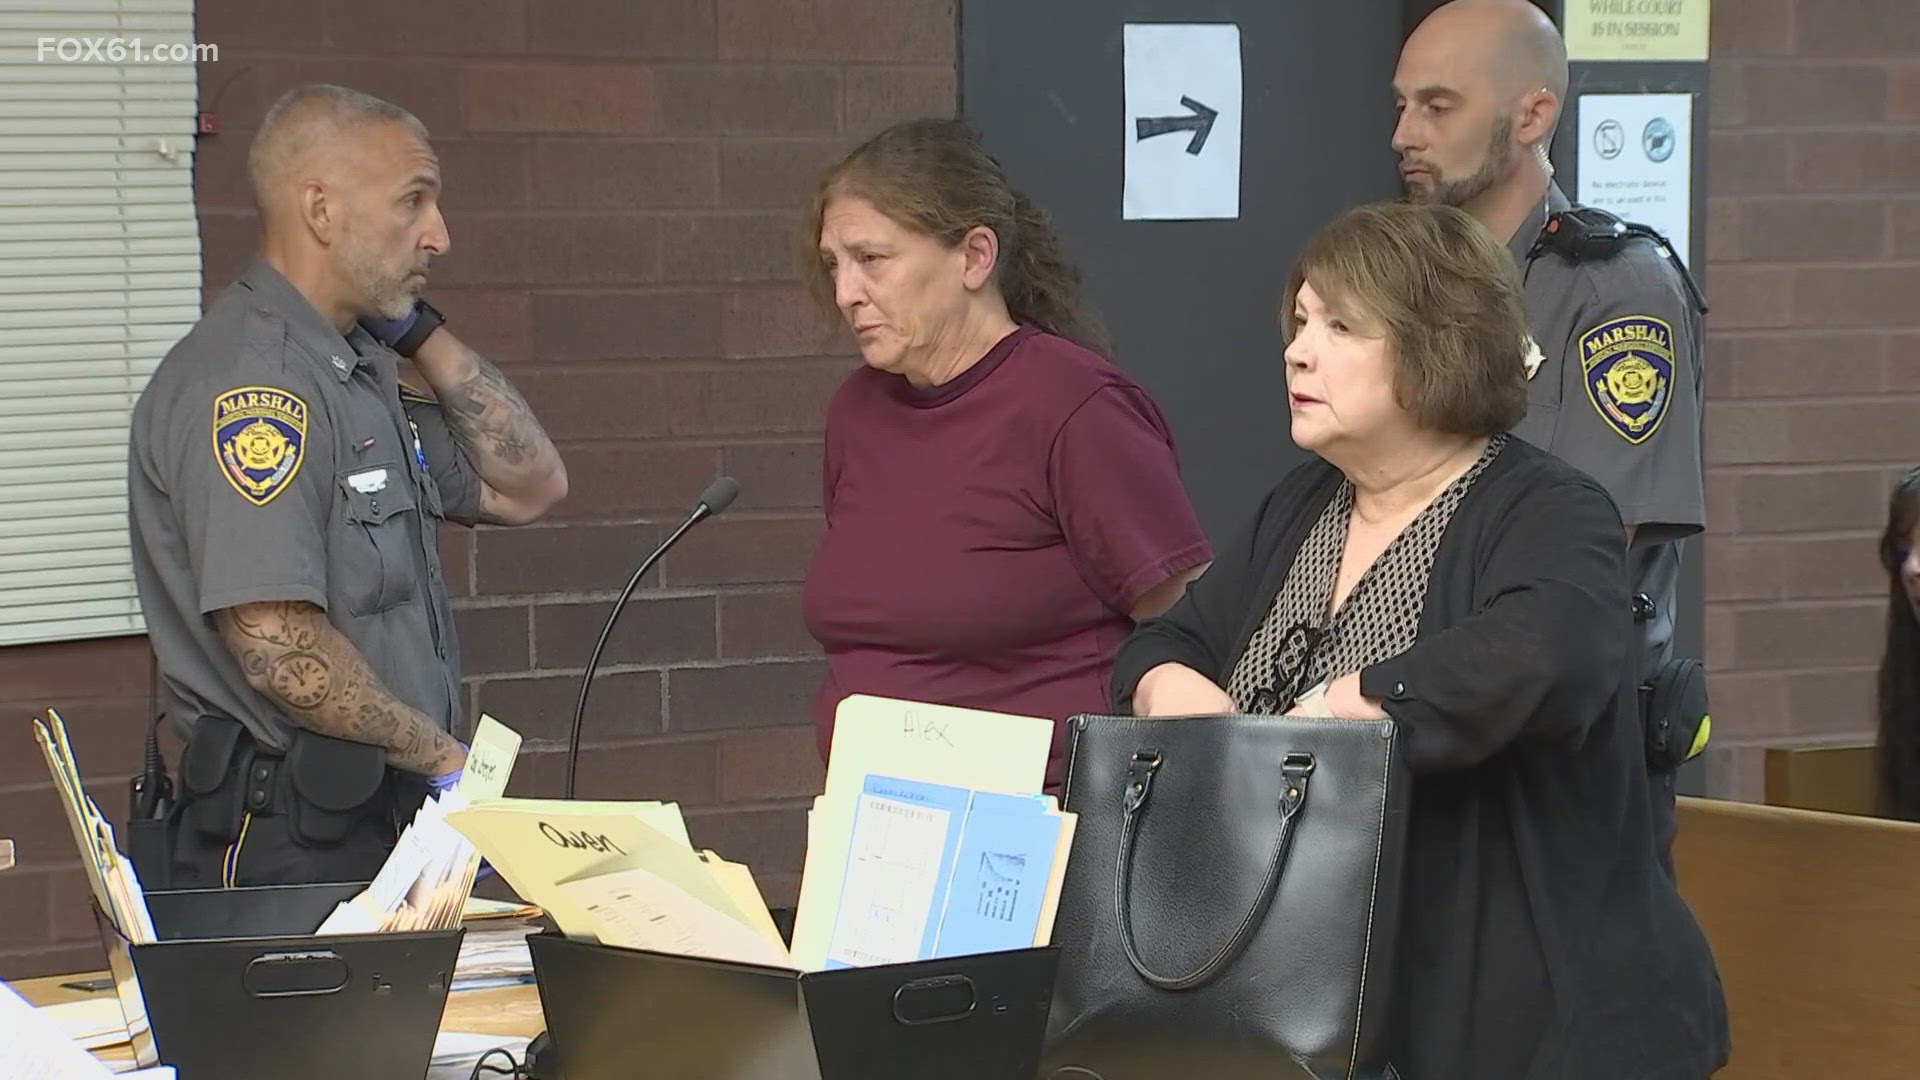 The judge set 55-year-old Denise Lucibello’s bond at $500,000. If she posts it, she can’t drive.